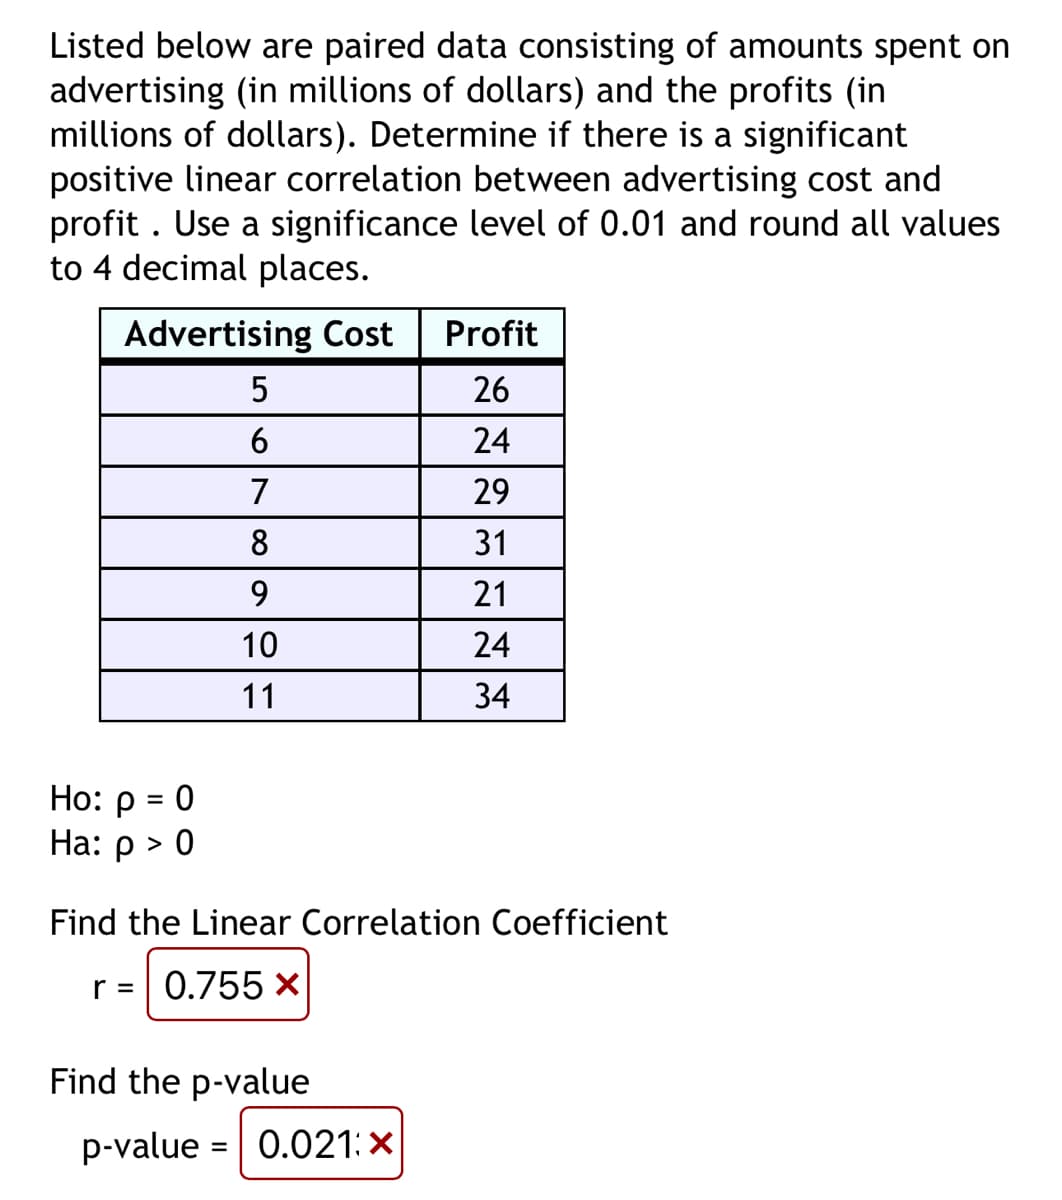 Listed below are paired data consisting of amounts spent on
advertising (in millions of dollars) and the profits (in
millions of dollars). Determine if there is a significant
positive linear correlation between advertising cost and
profit. Use a significance level of 0.01 and round all values
to 4 decimal places.
Advertising Cost
5
6
7
8
9
10
11
Ho: p= 0
Ha: p > 0
Find the Linear Correlation Coefficient
r = 0.755 X
Find the p-value
p-value=
=
Profit
26
24
29
31
21
24
34
0.021: X